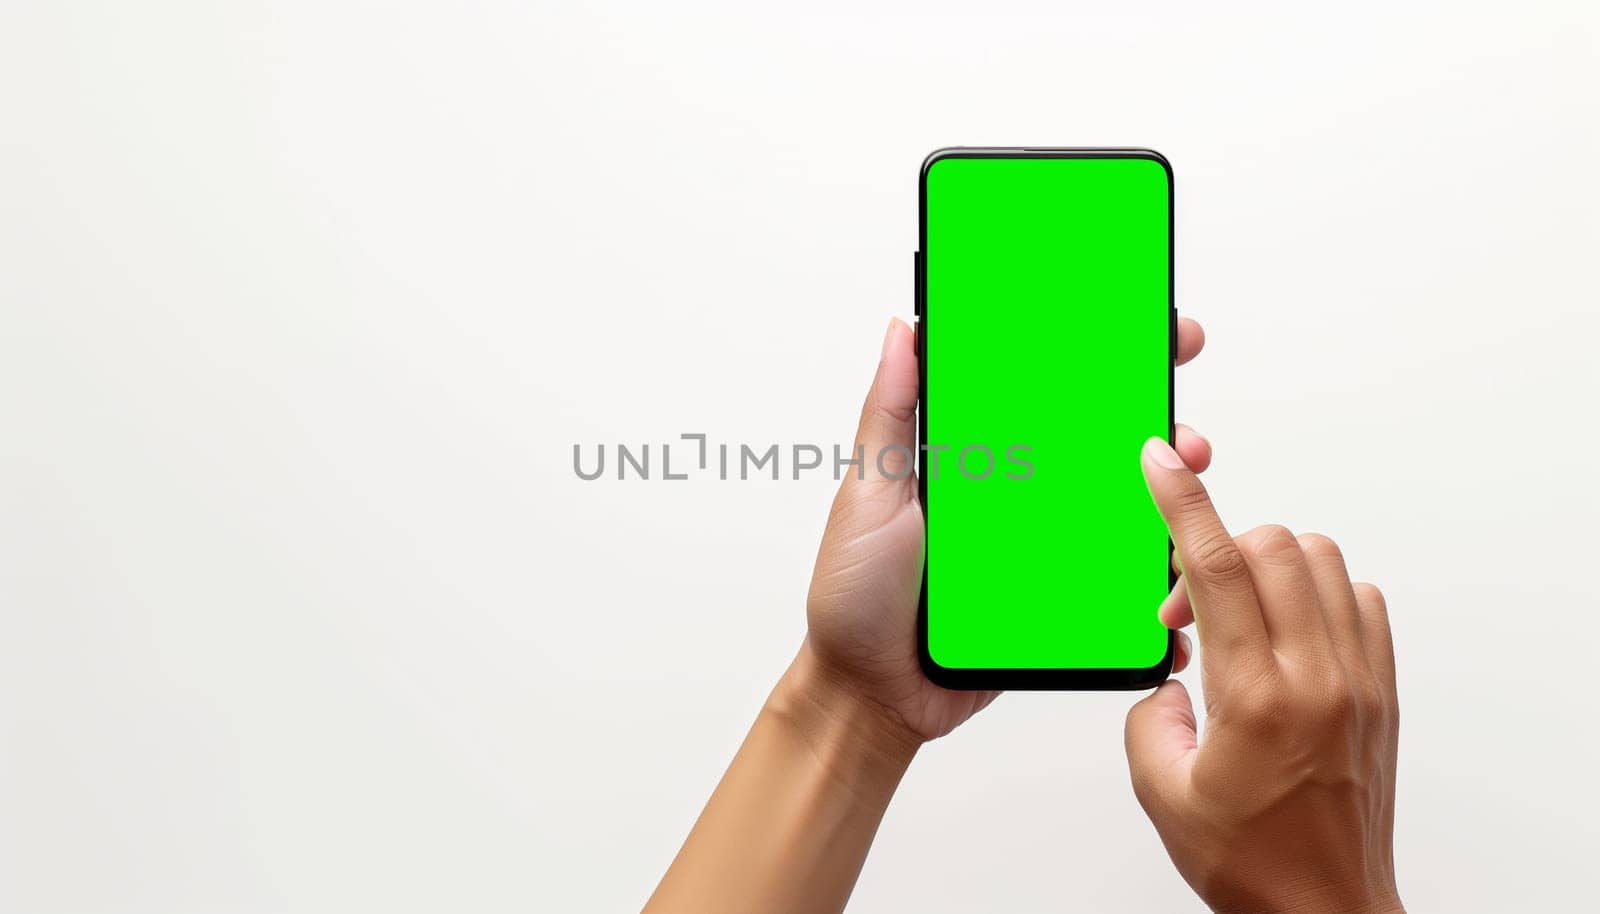 Hand holding smartphone green screen isolated on white background